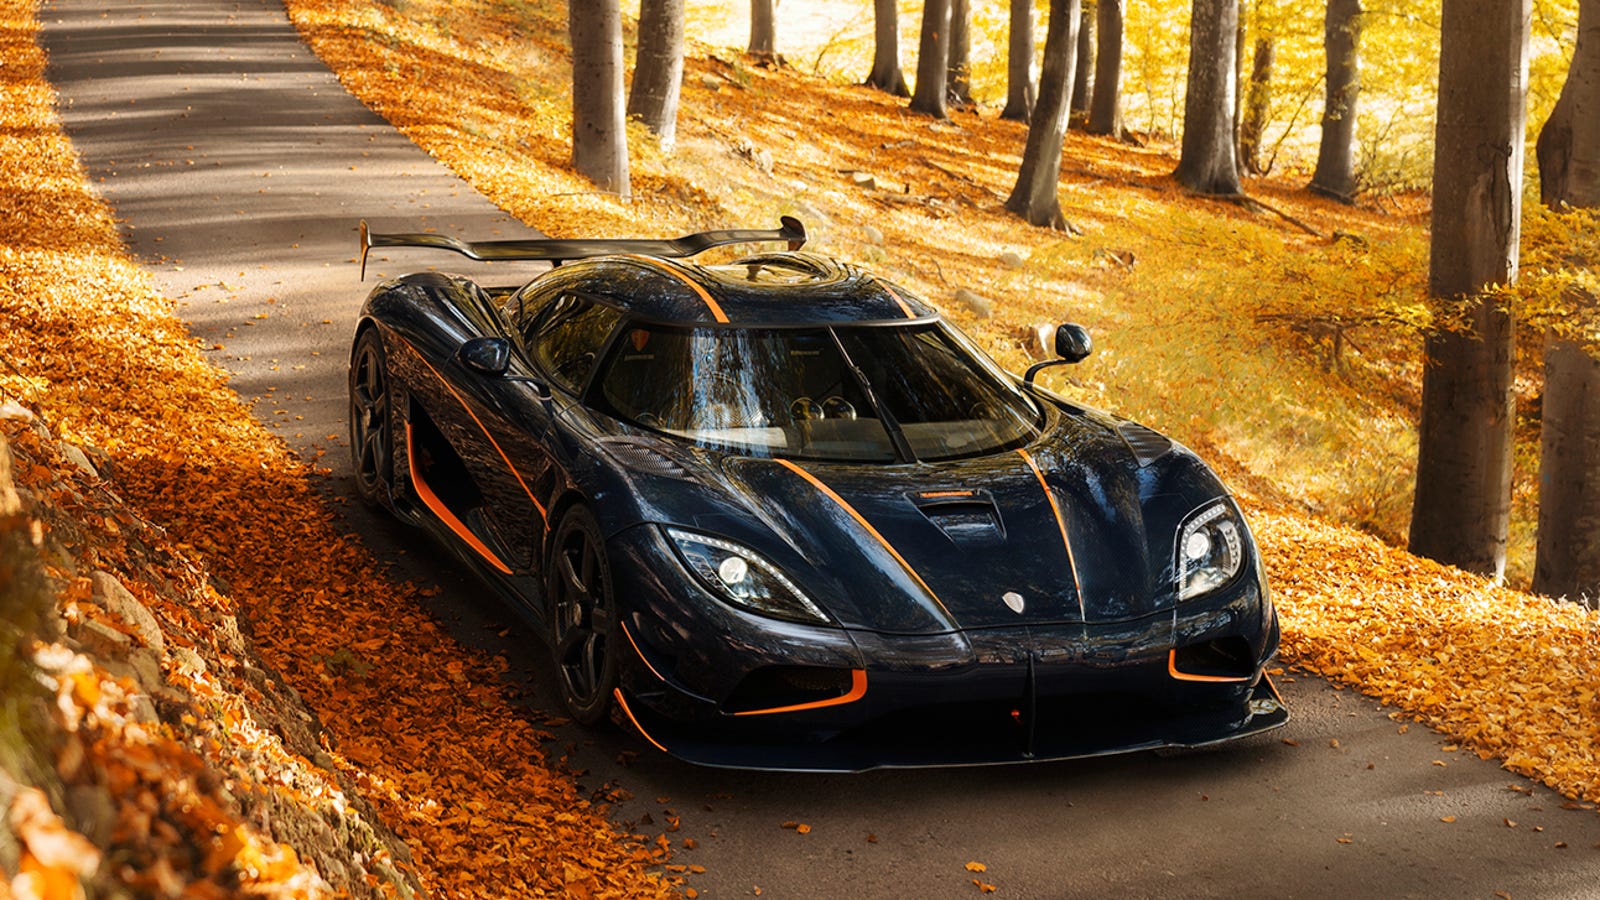 Koenigsegg Is Planning a New Supercar for the Low Price of $1.1 Million